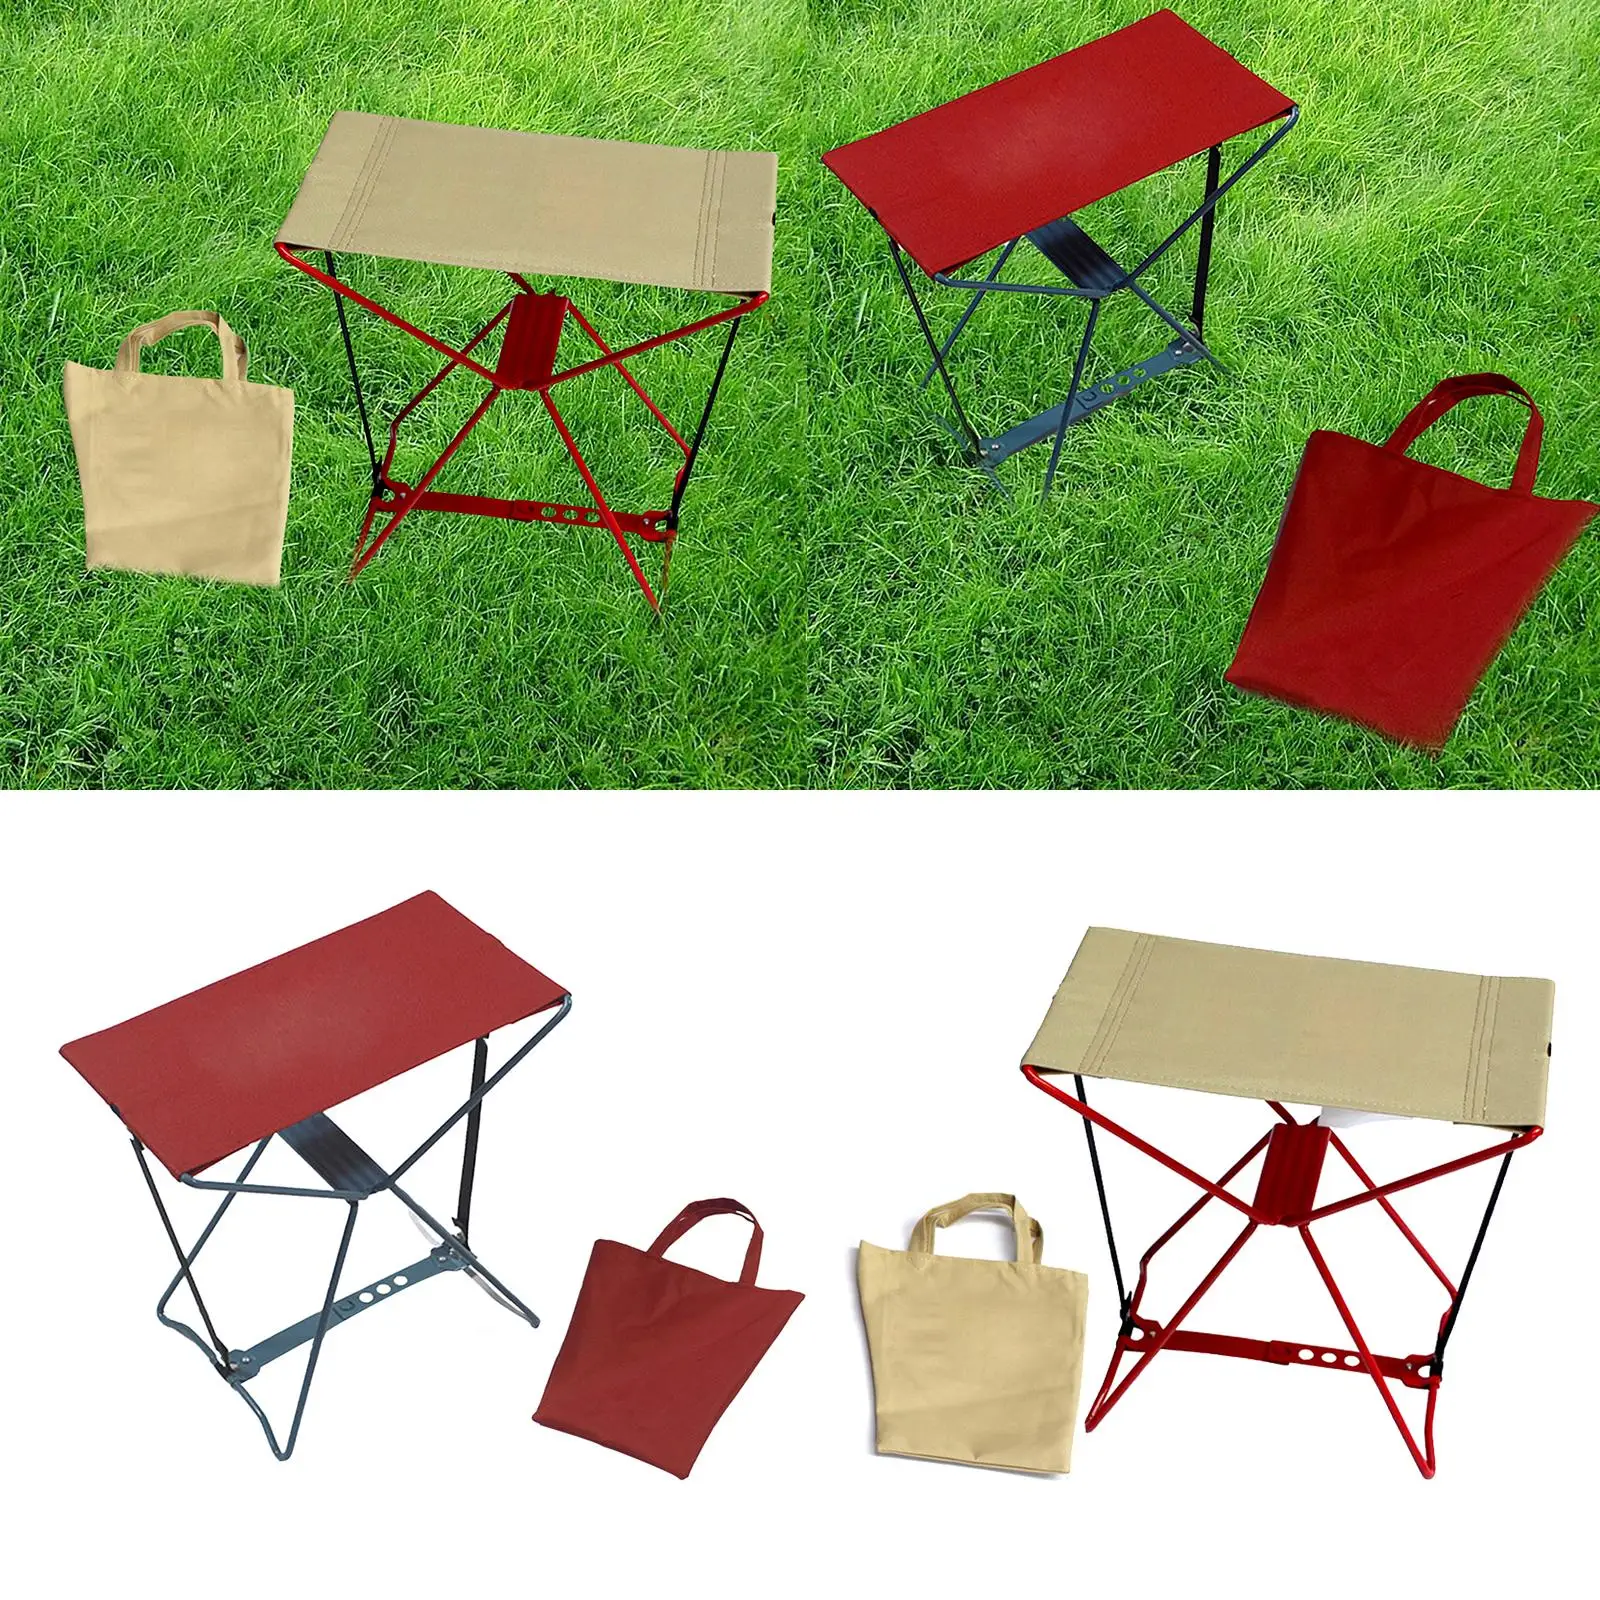 Folding Fishing Stool Camping Chair Multifunction Soft with Storage Bag Folding Chair for Bedroom Yravel Hunting Hiking Garden